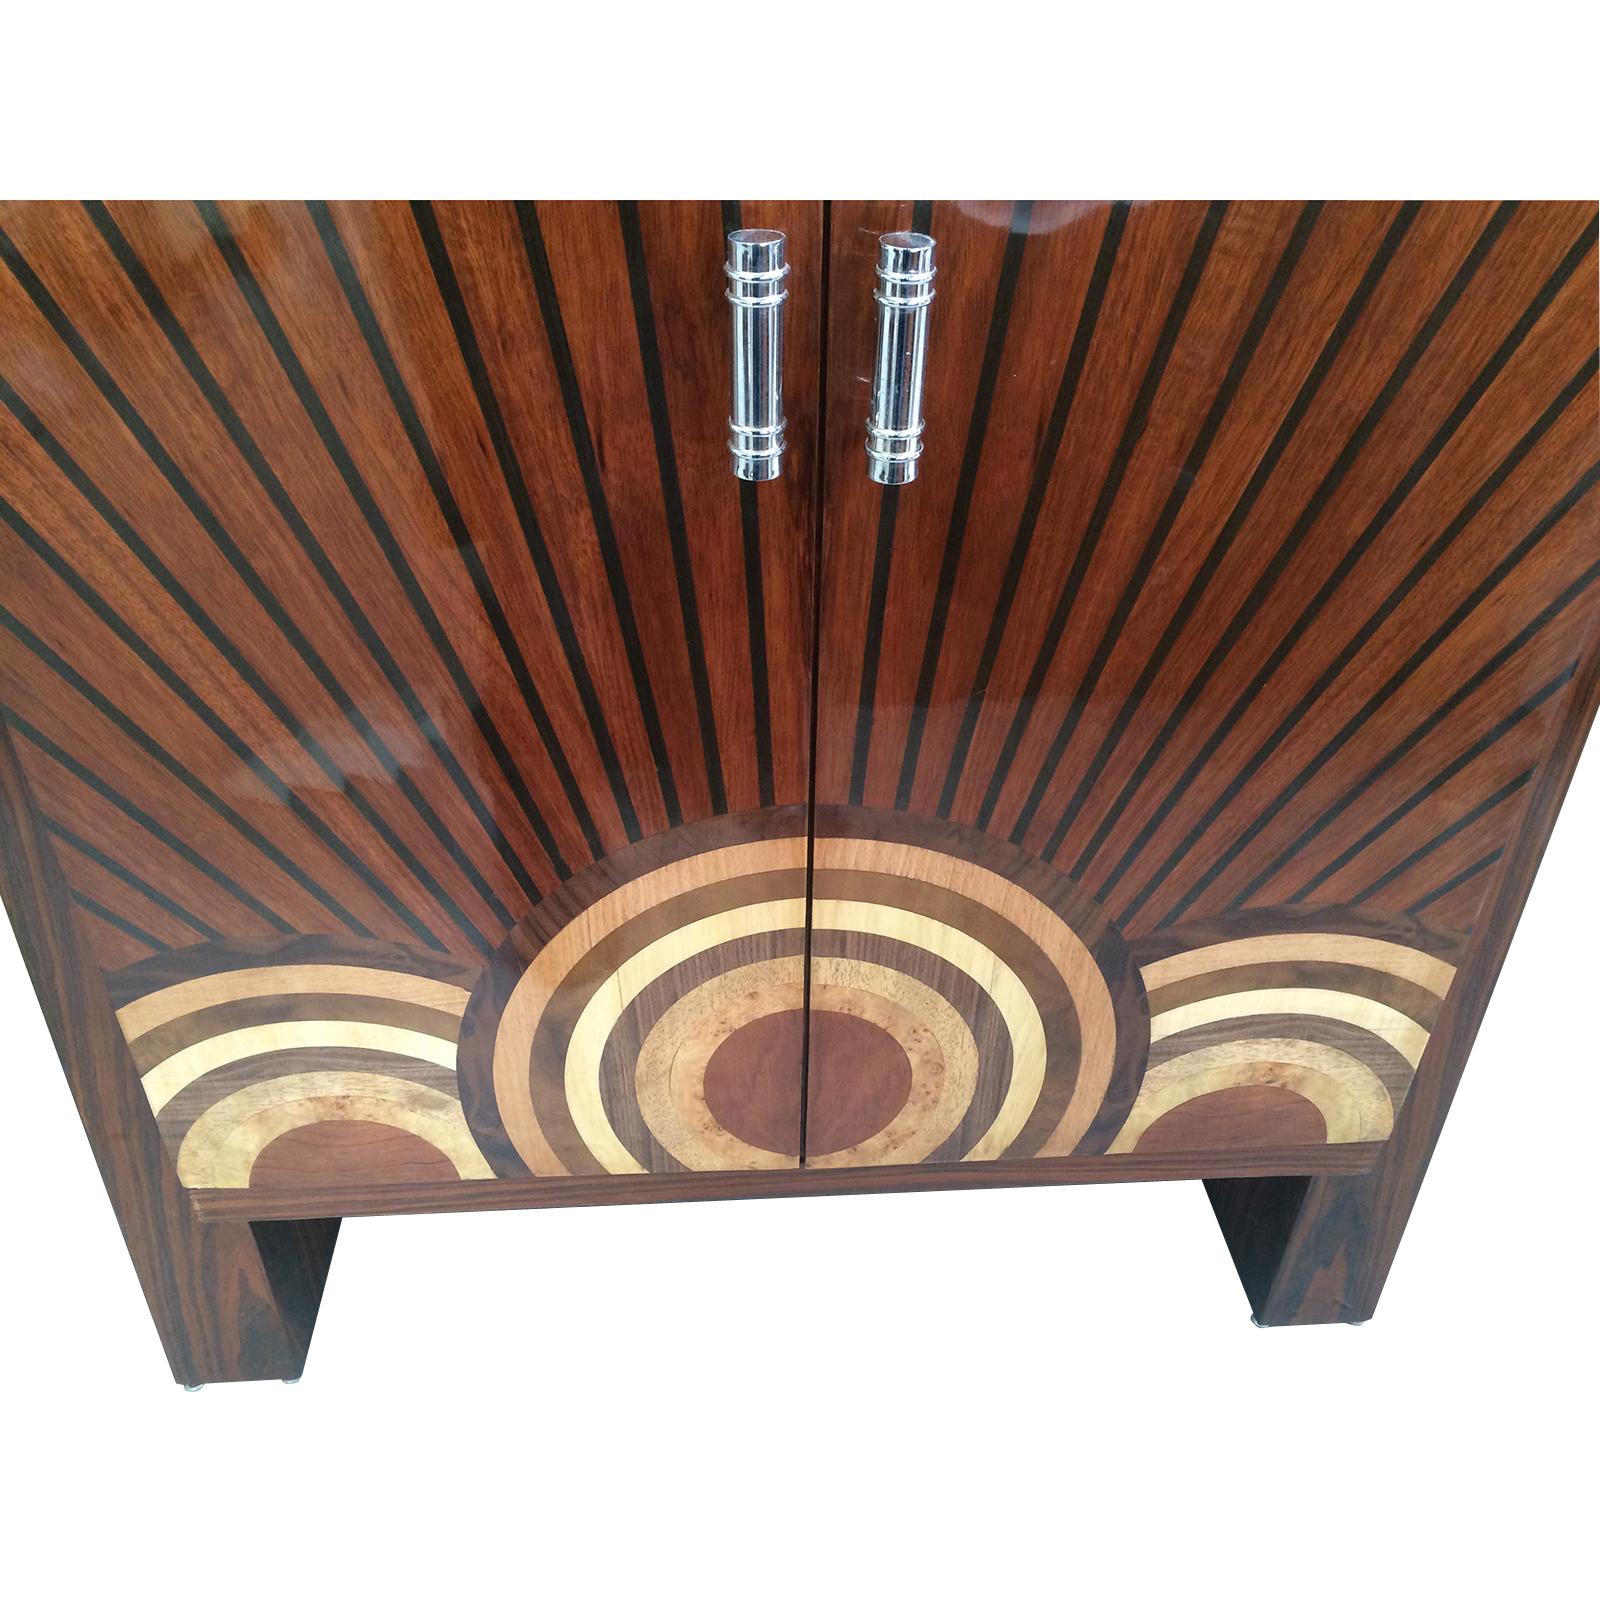 Art Deco Cocktail Cabinet, Dry Bar, the front in multiple concentric circles of inlaid coloured Fruitwoods forming a large , central “Bullseye” across the doors, at the bottom, with identical part “Bullseyes” adjoining on left and right. From these